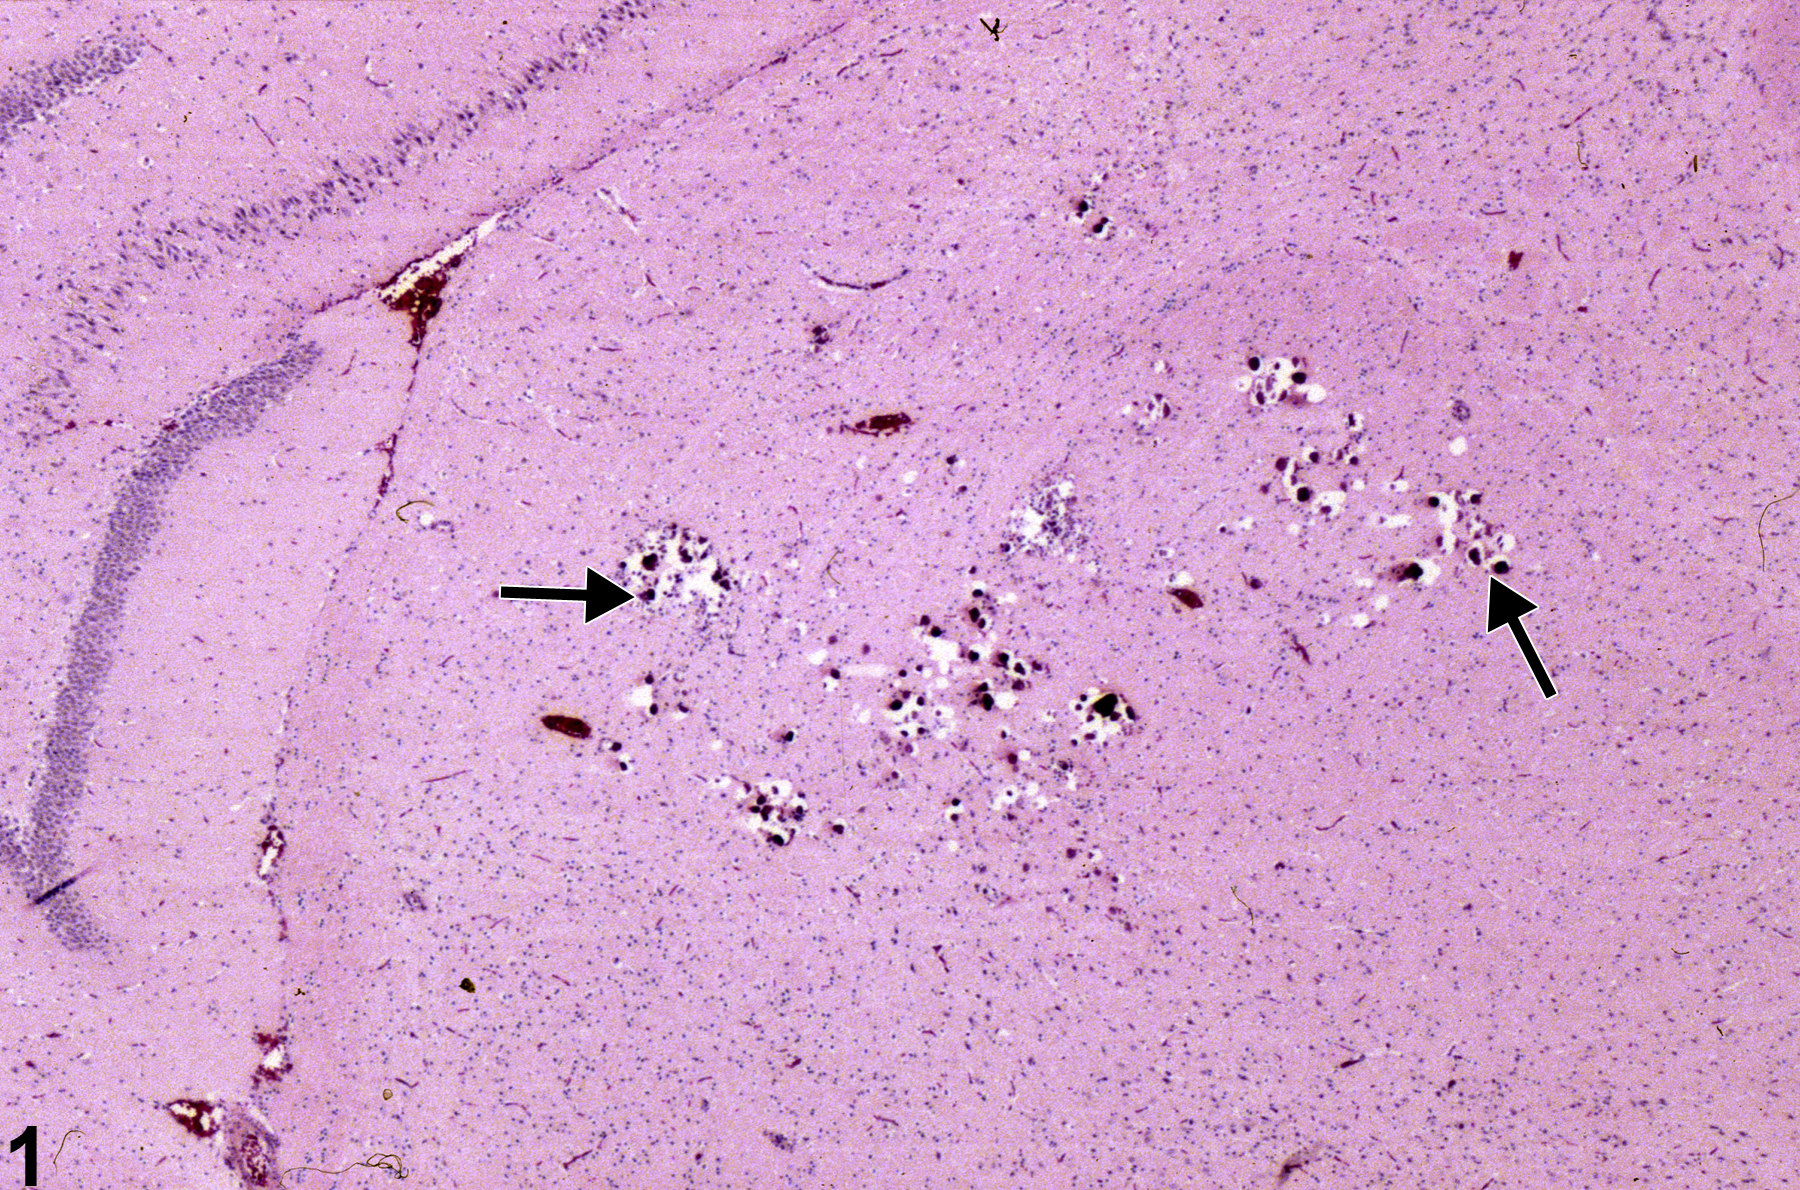 Image of mineralization in the brain from a female F344/N rat in a subchronic study